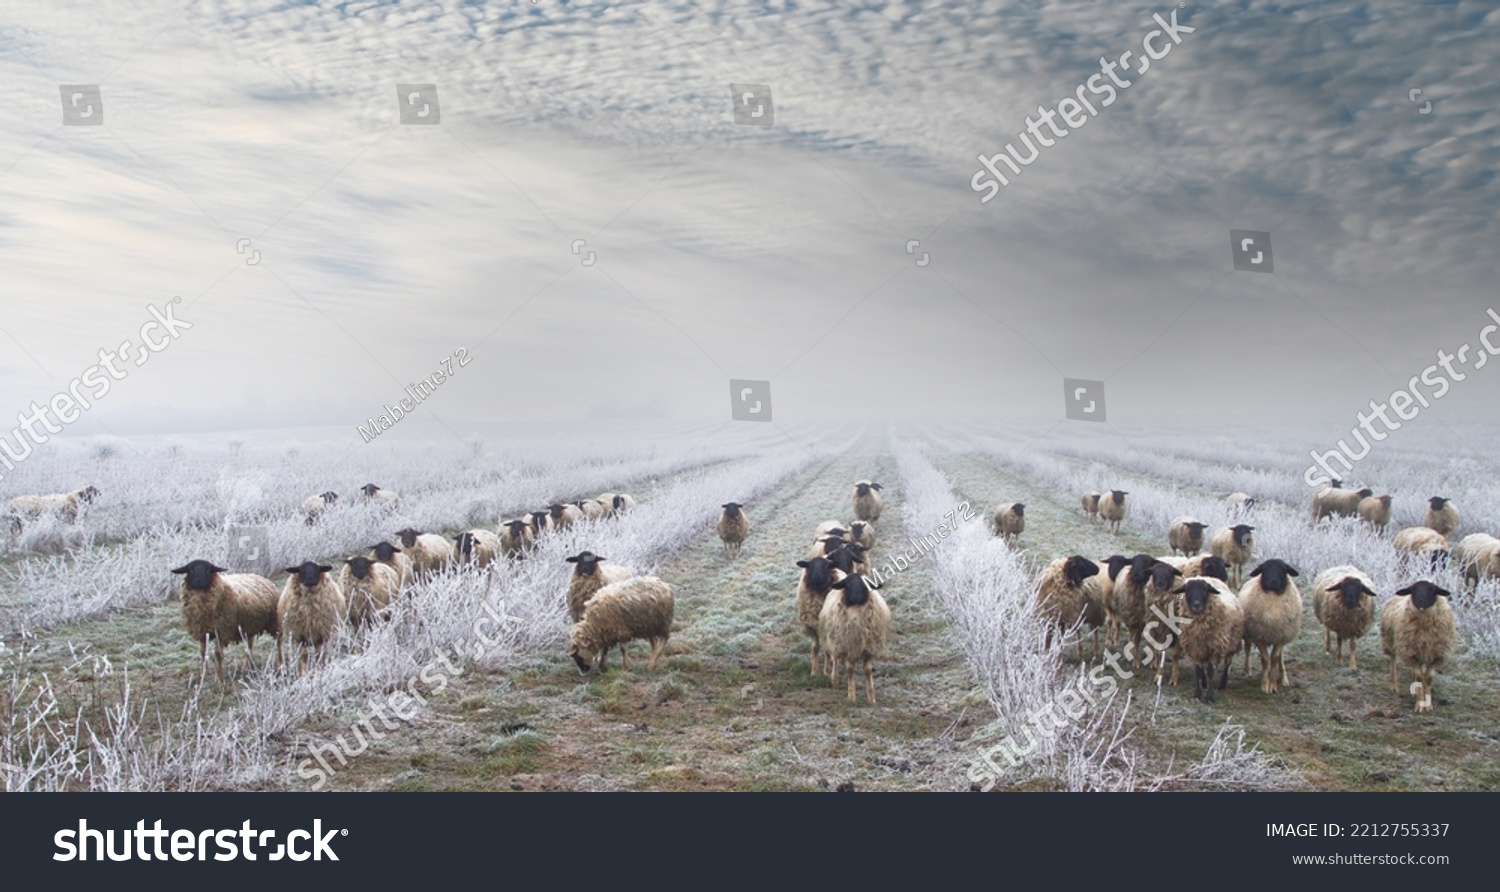 weed control with herd of sheep in the snow. Grazing Animals, Sheep Herd in a plantation of Aronia shrubs, chokeberry - fruits. freezing rain storm with fog in Winter frosty landscape covered by ice  #2212755337